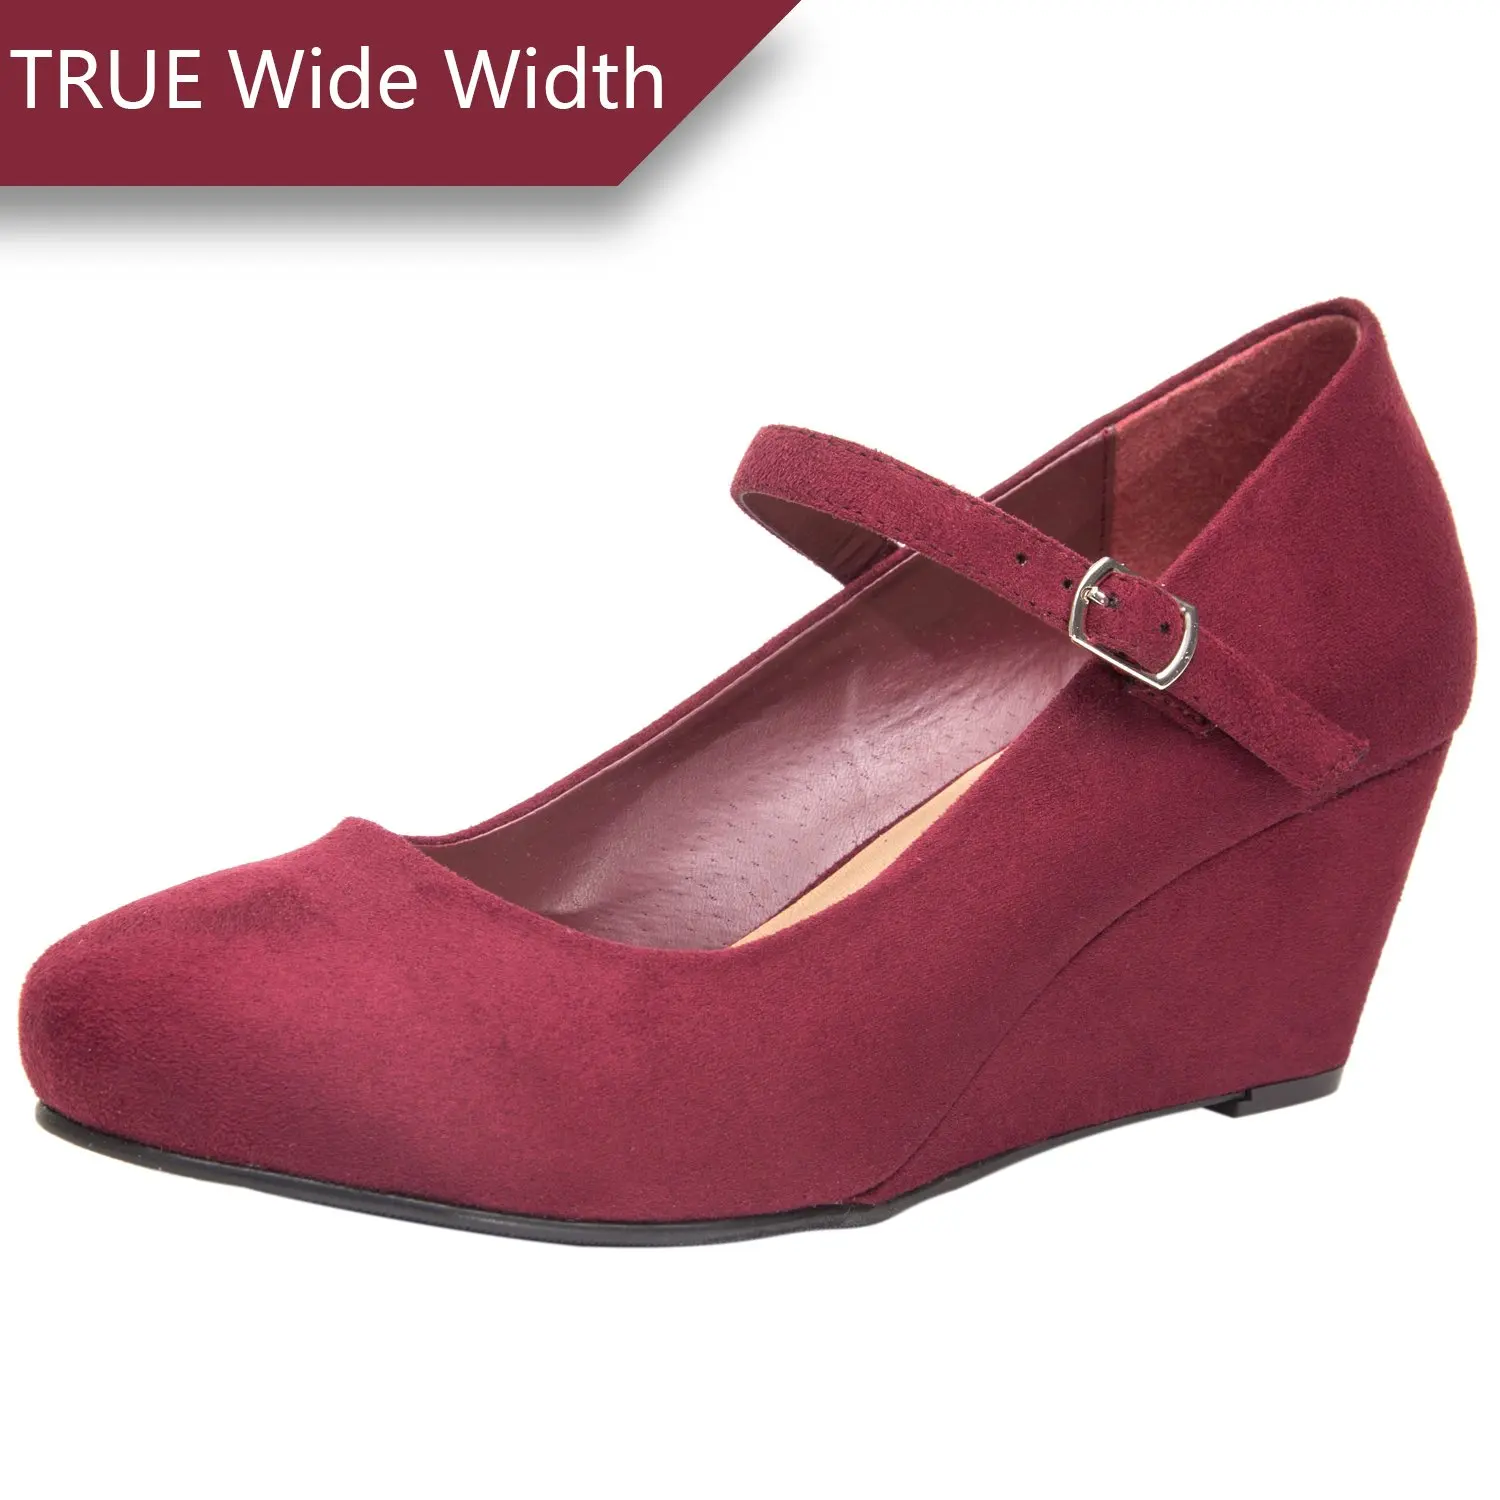 inexpensive wide width shoes